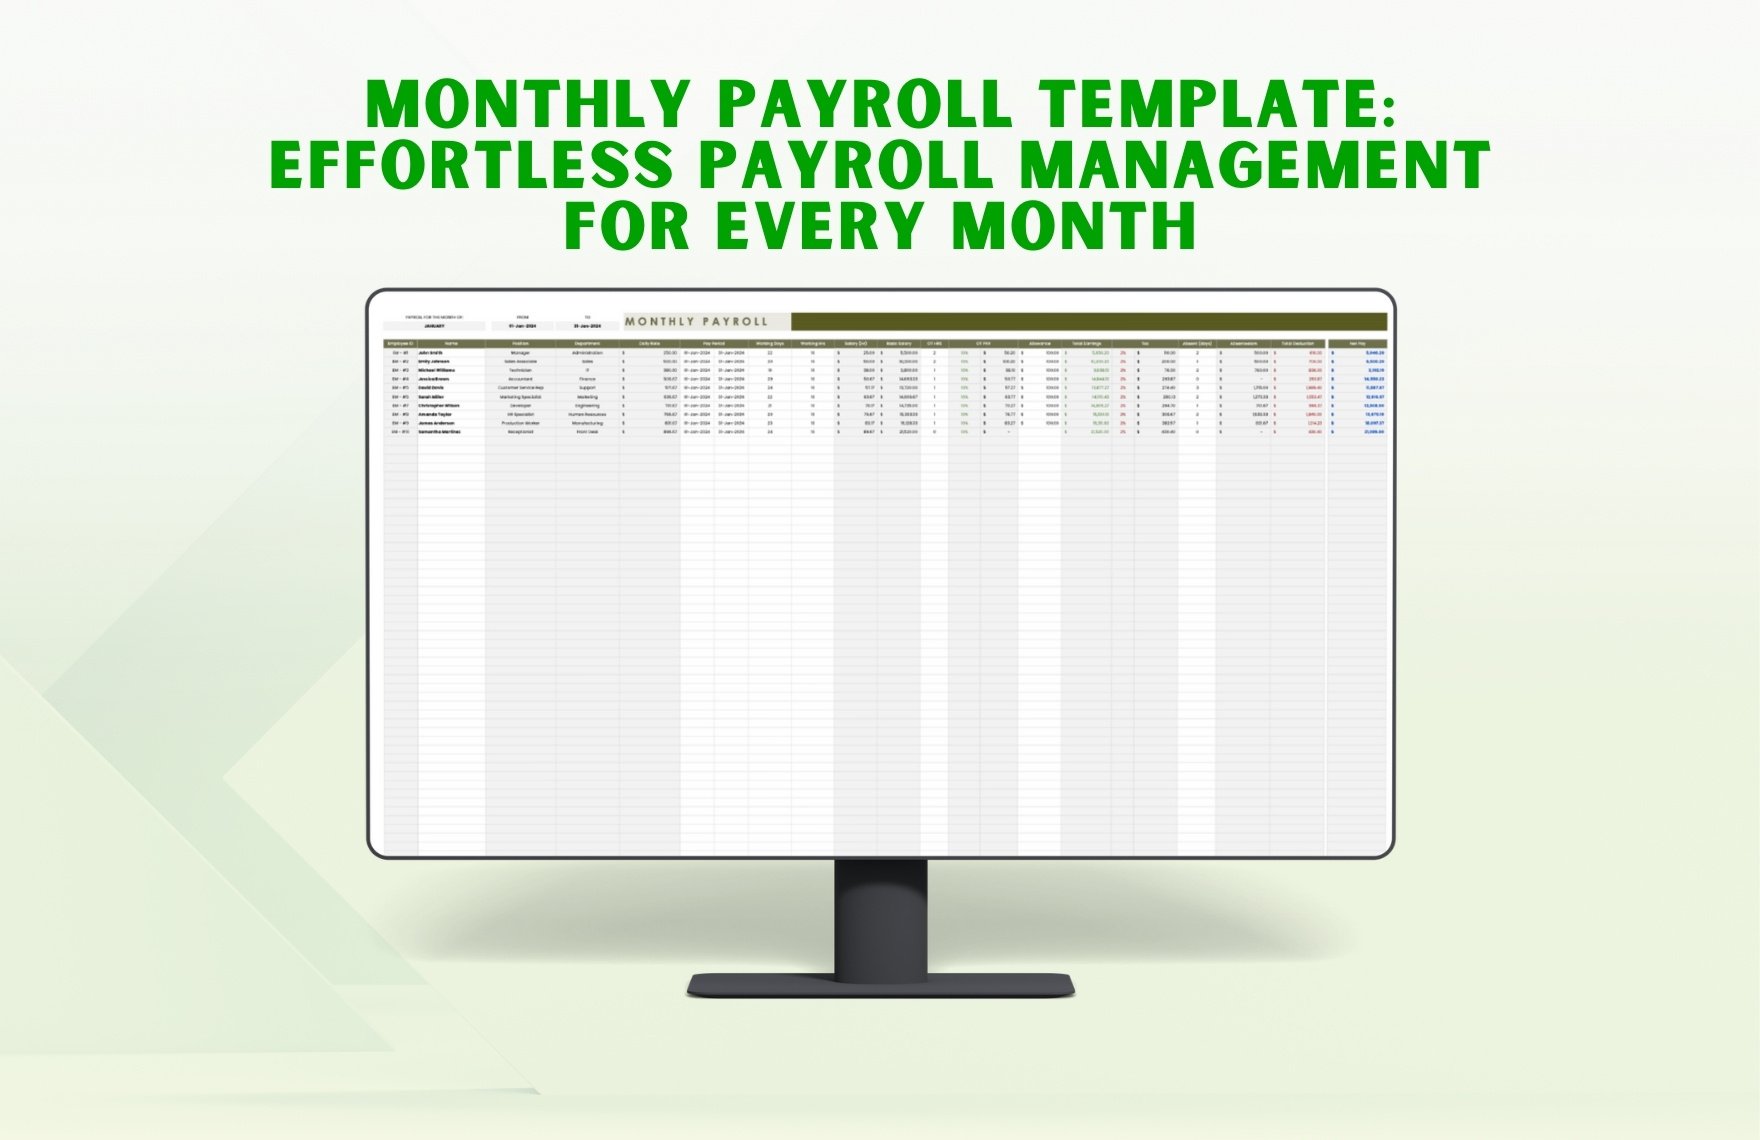 Monthly Payroll Template